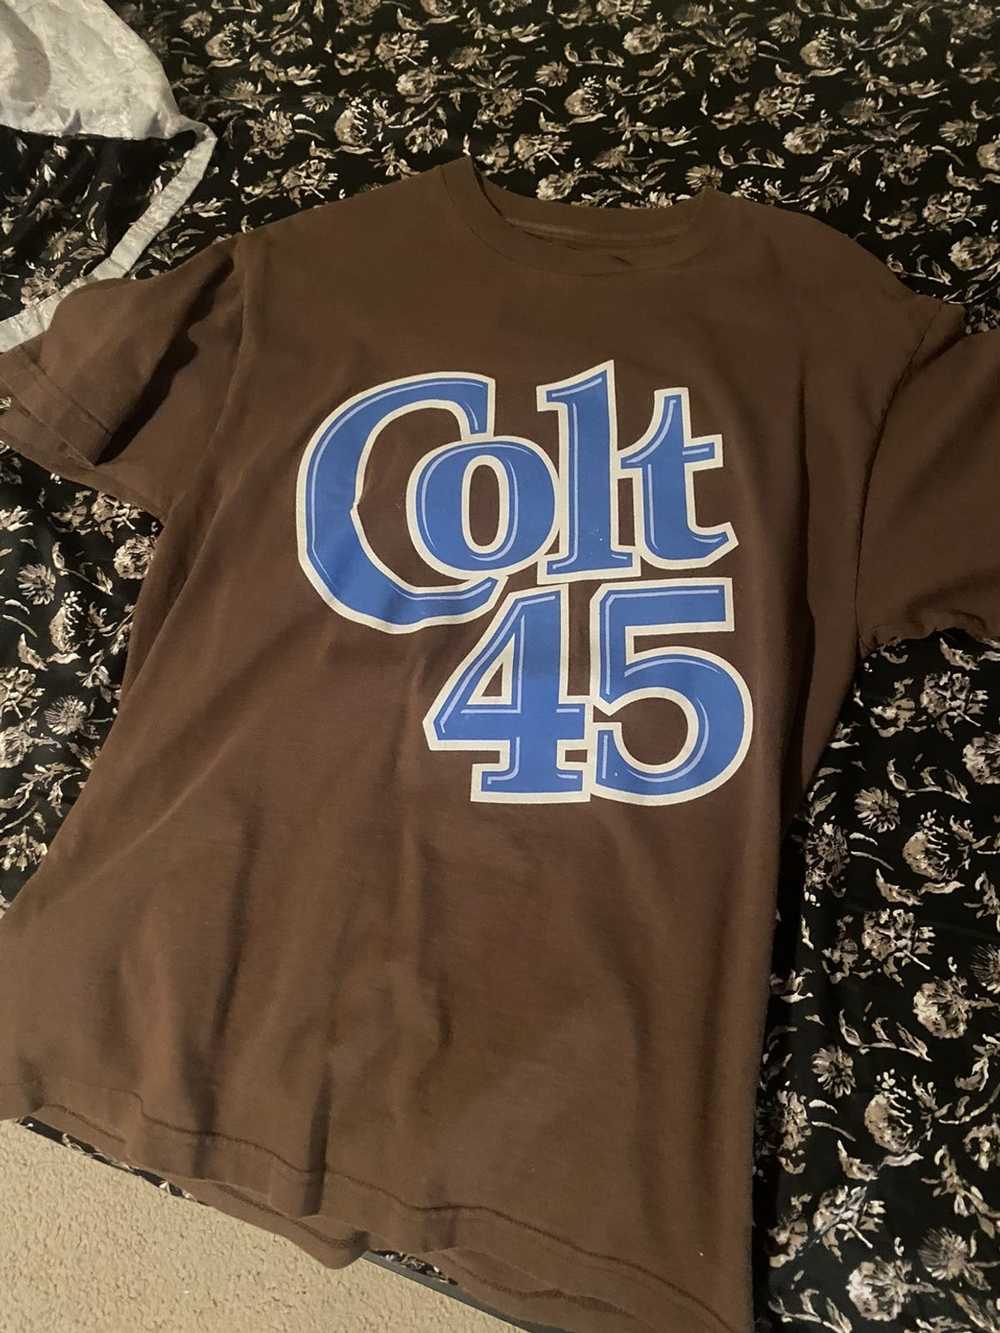 Fuck The Population Ftp colt 45 tee - image 1